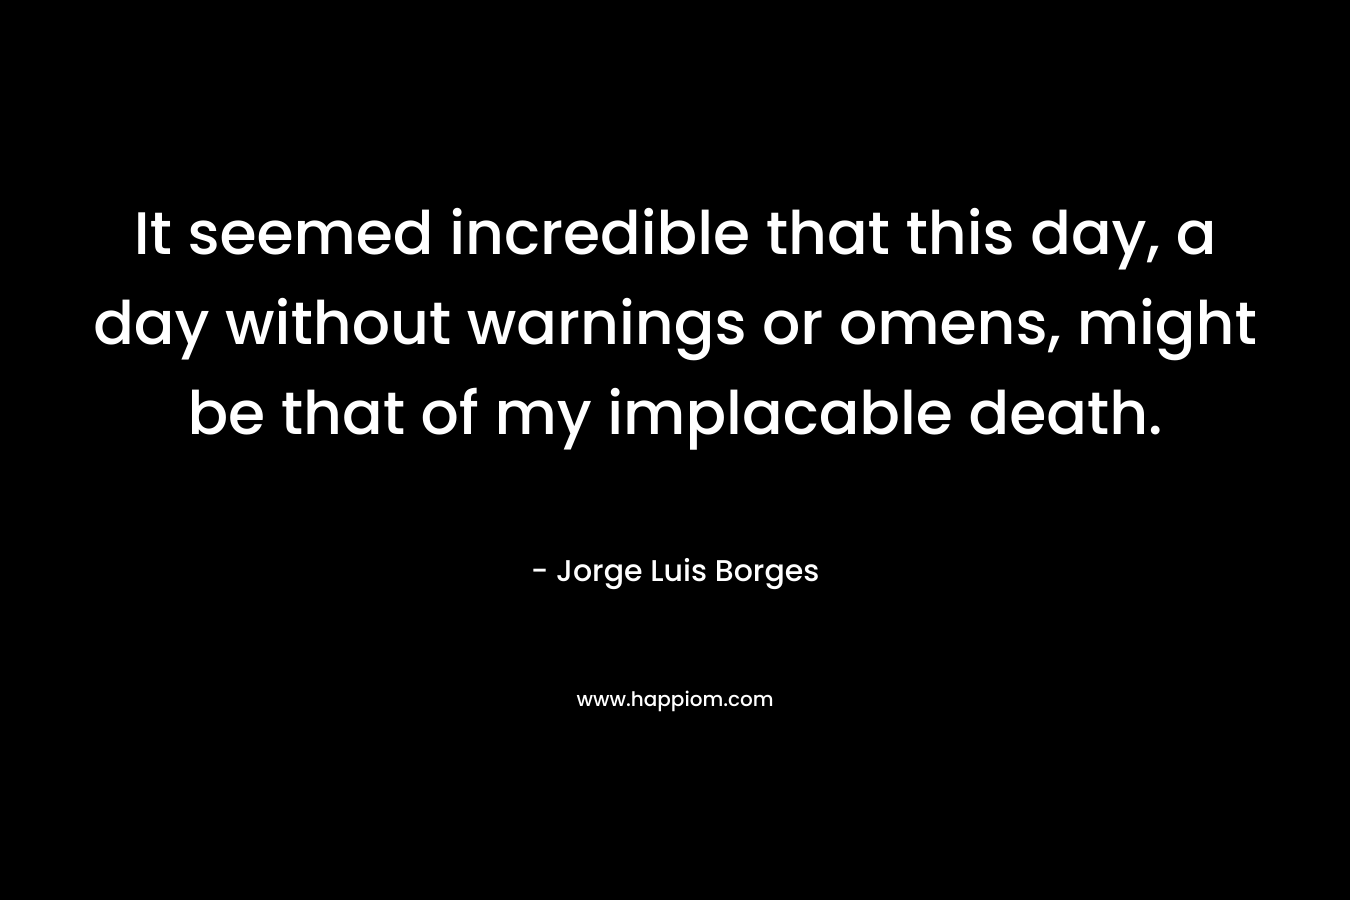 It seemed incredible that this day, a day without warnings or omens, might be that of my implacable death. – Jorge Luis Borges